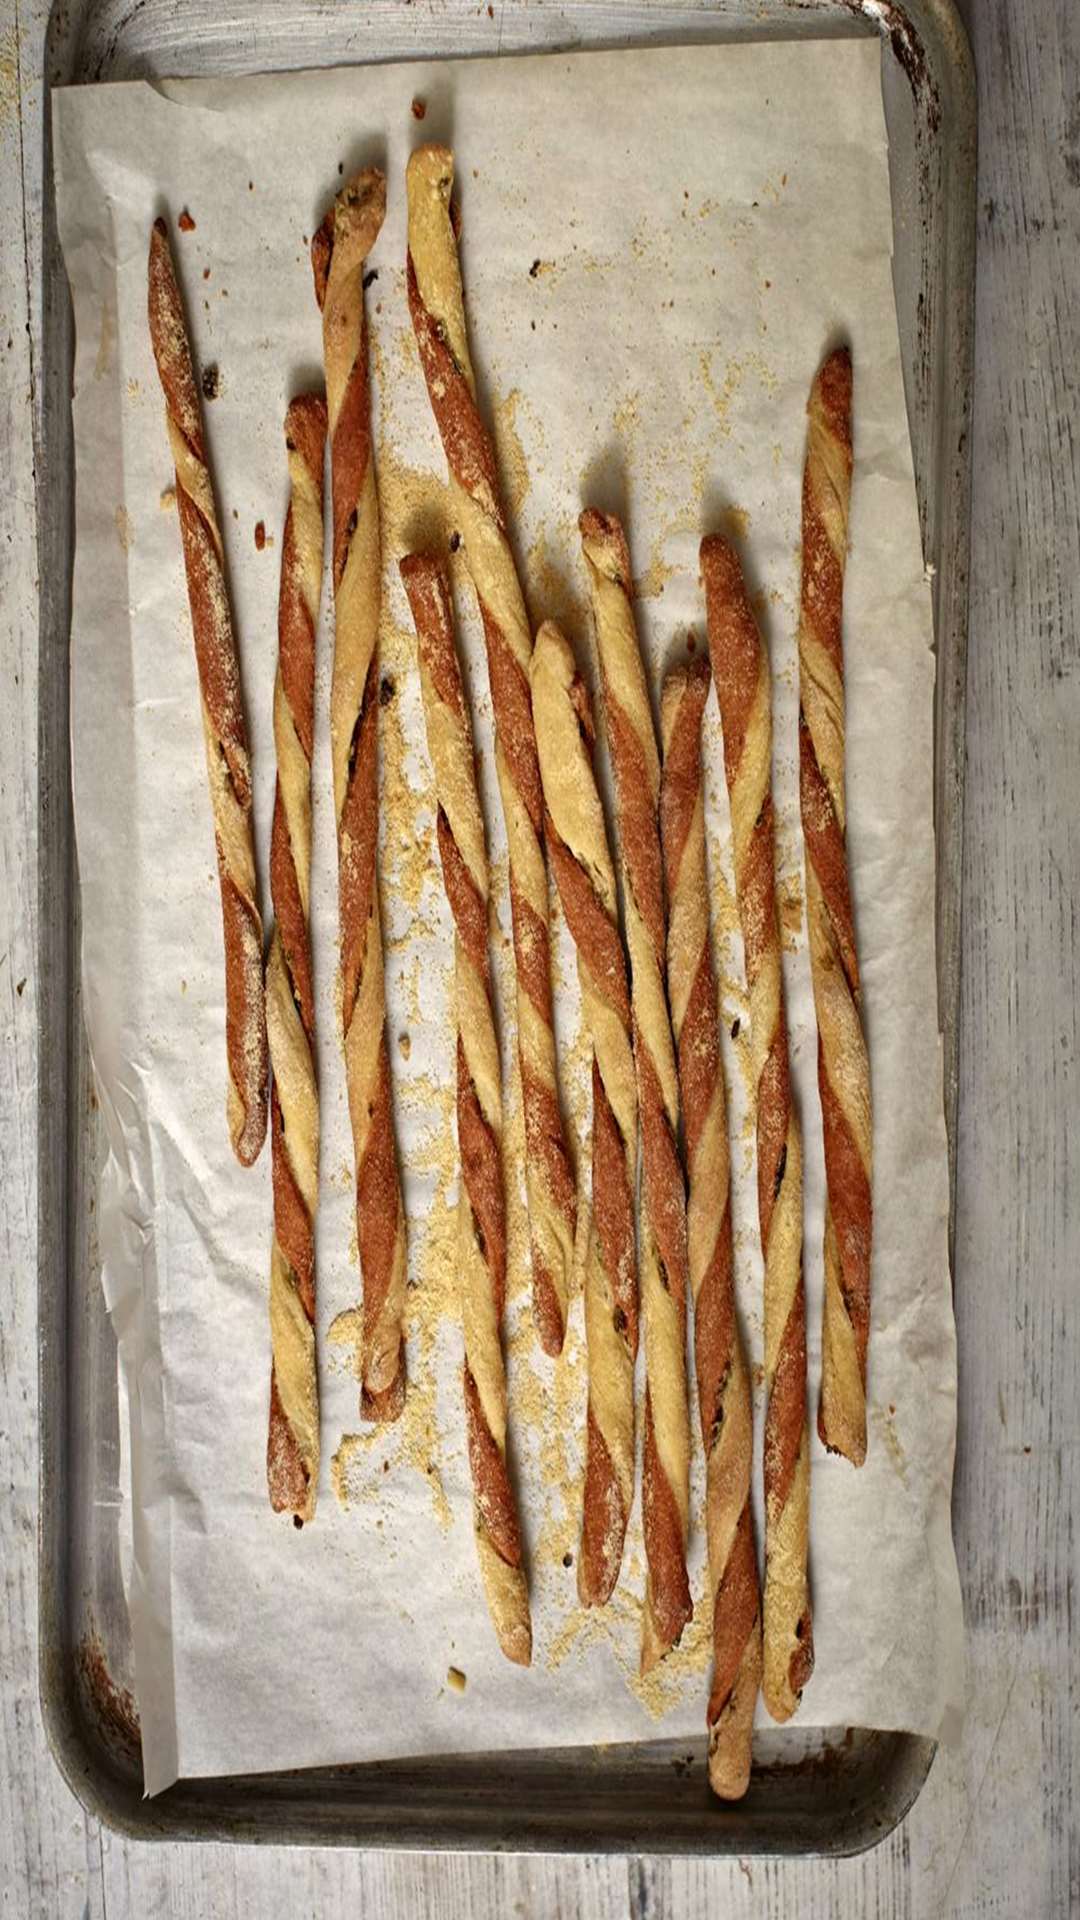 Mexican breadsticks from Great British Bake Off: Everyday by Linda Collister, published by BBC Books